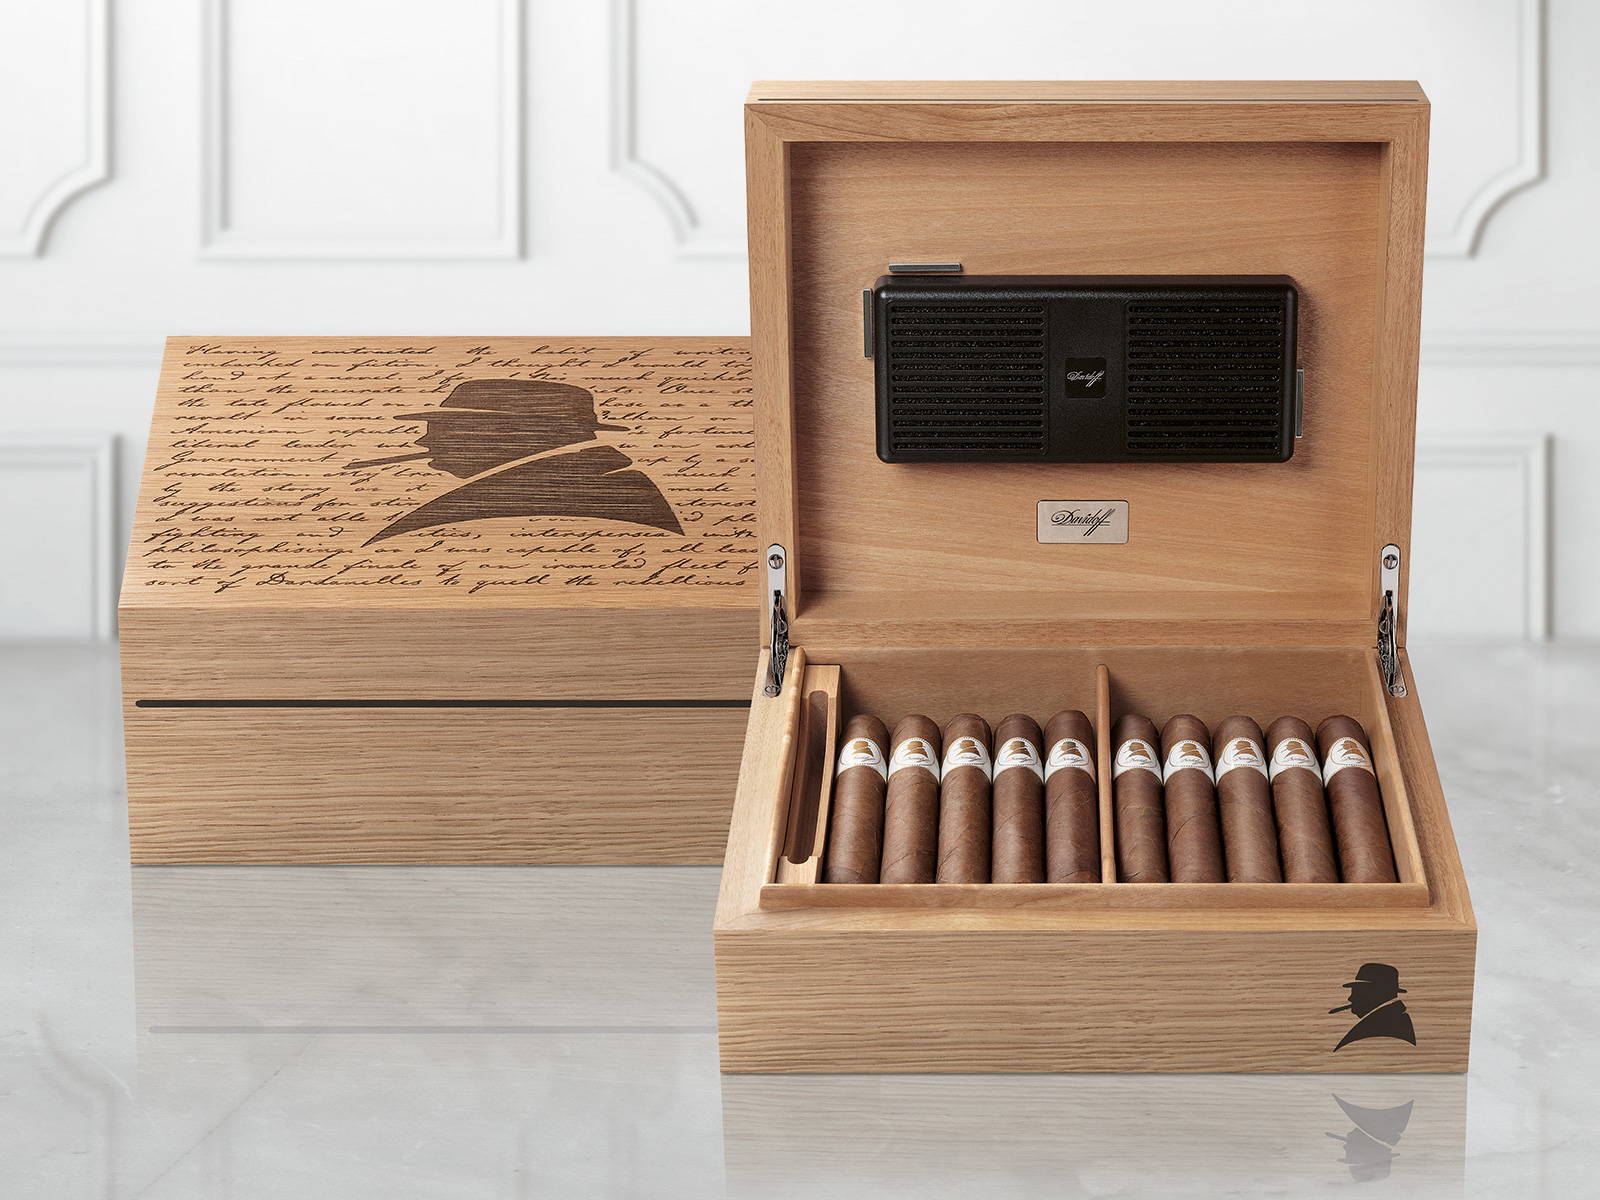 3. Opened Davidoff Winston Churchill Primos Humidor with «The Original Series» cigars inside next to another closed humidor.